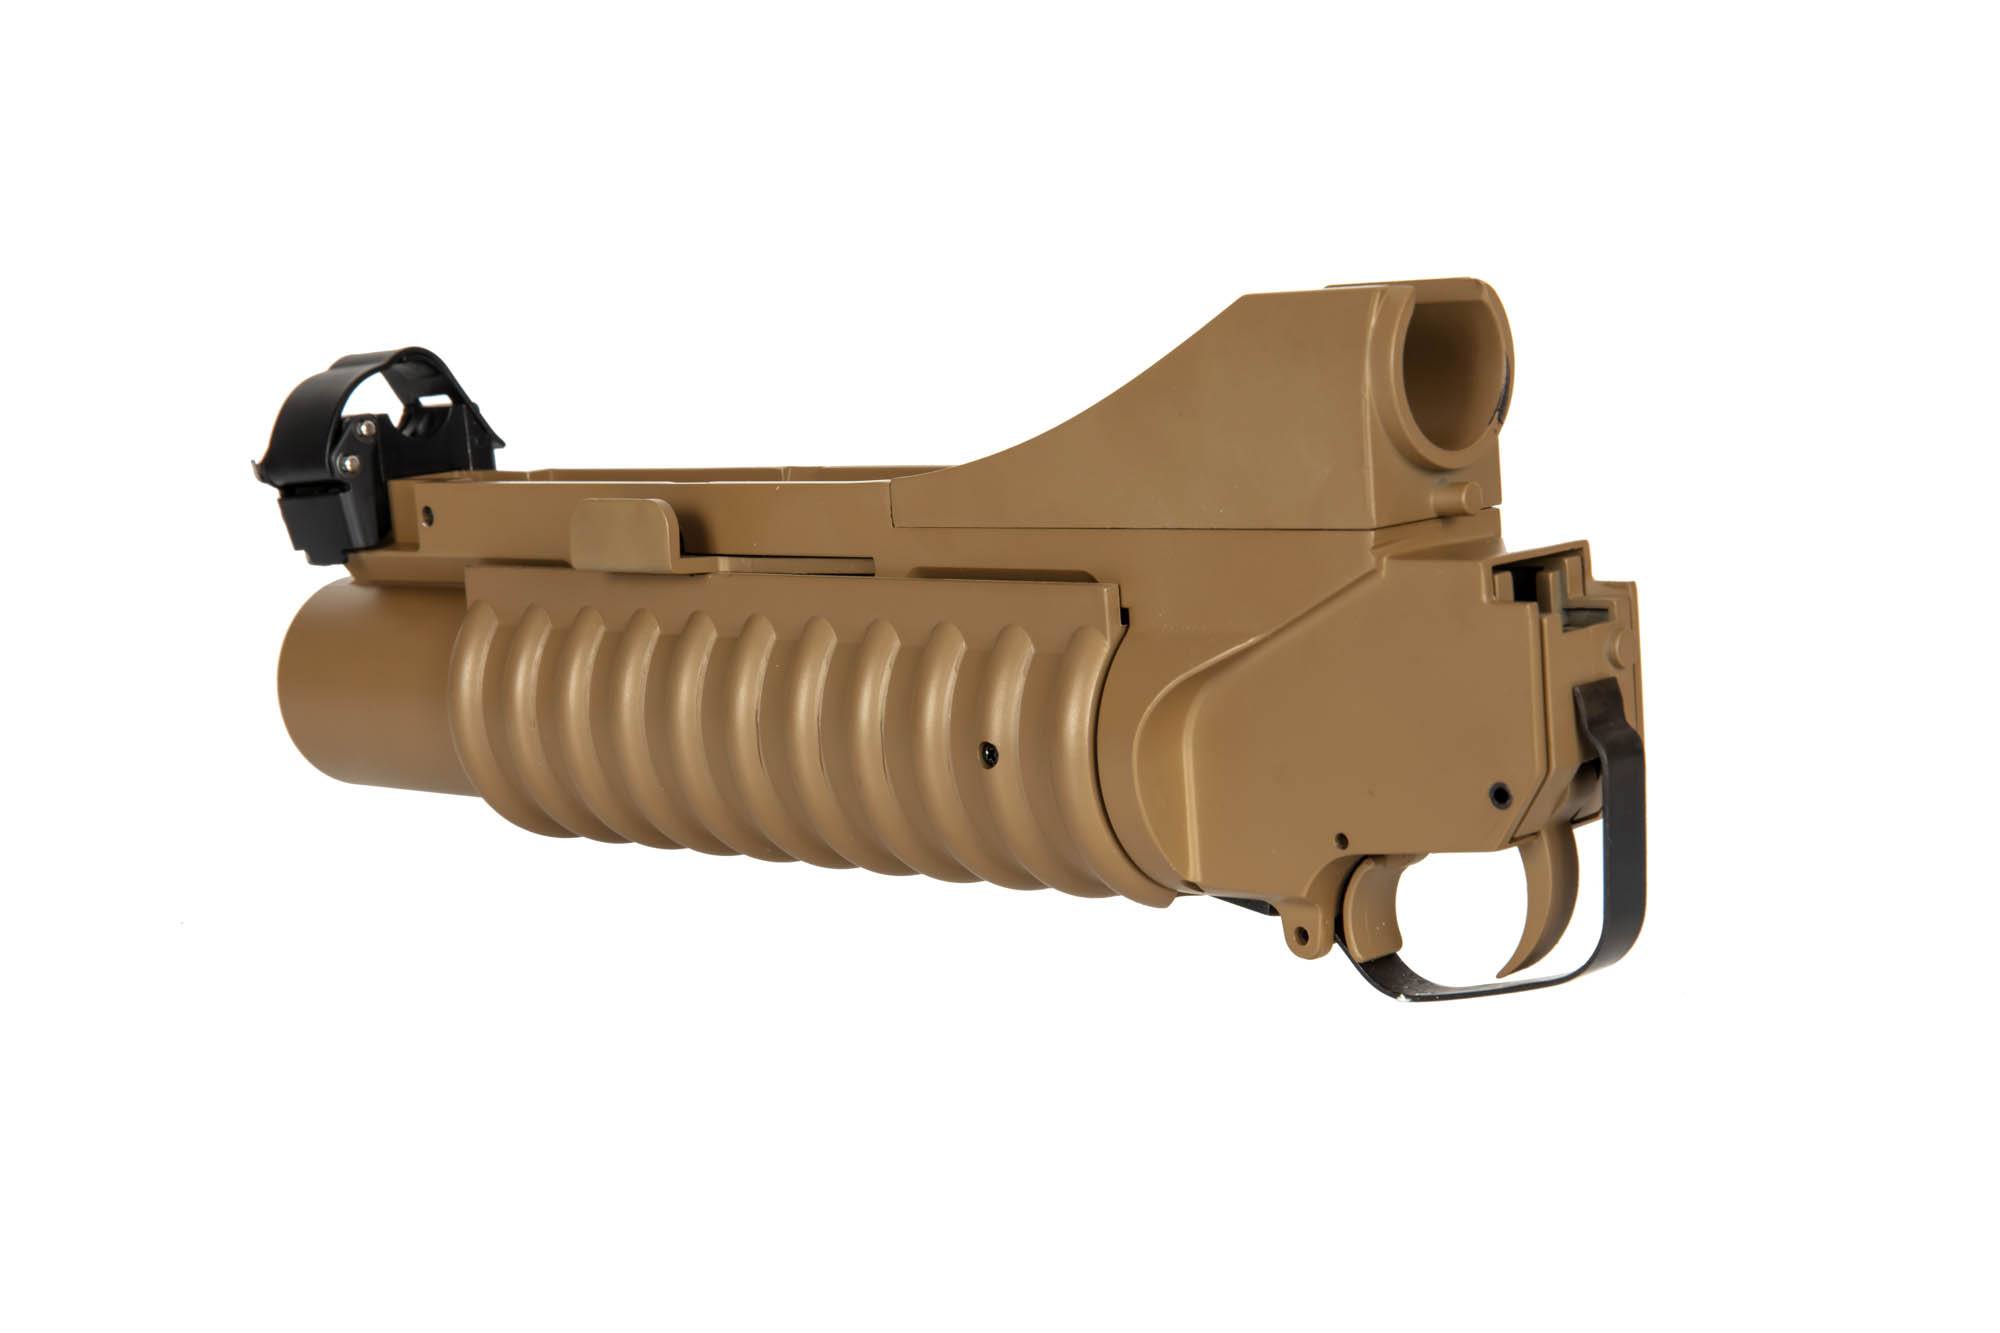 M203 Grenade Launcher - 3 in 1 - Short version - TAN by DBOY on Airsoft Mania Europe